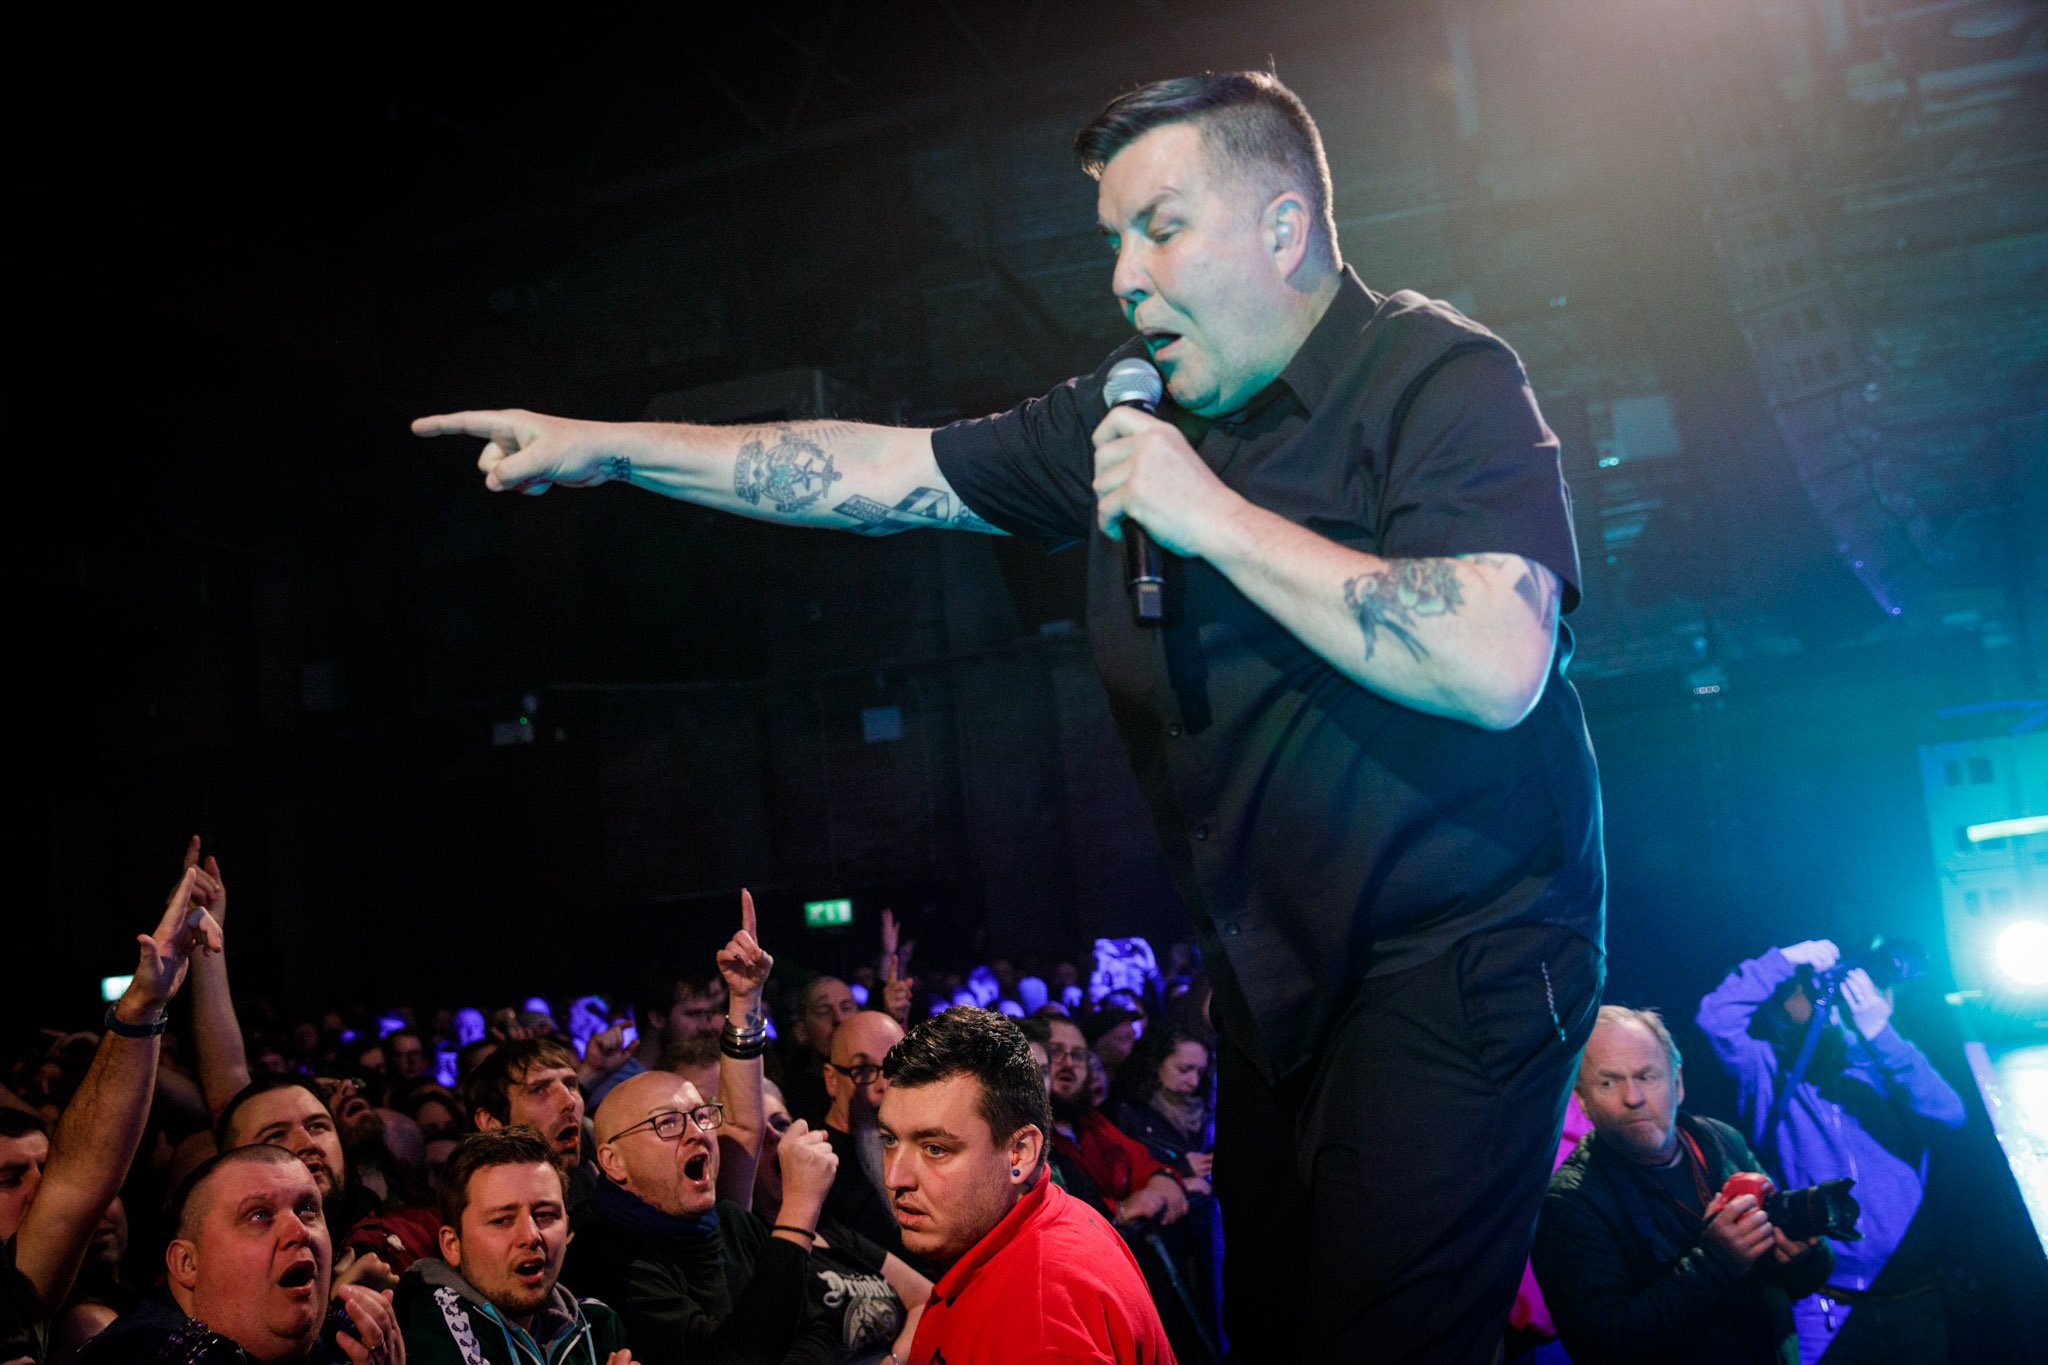 Dropkick Murphys at the O2 Victoria Warehouse in Manchester on J